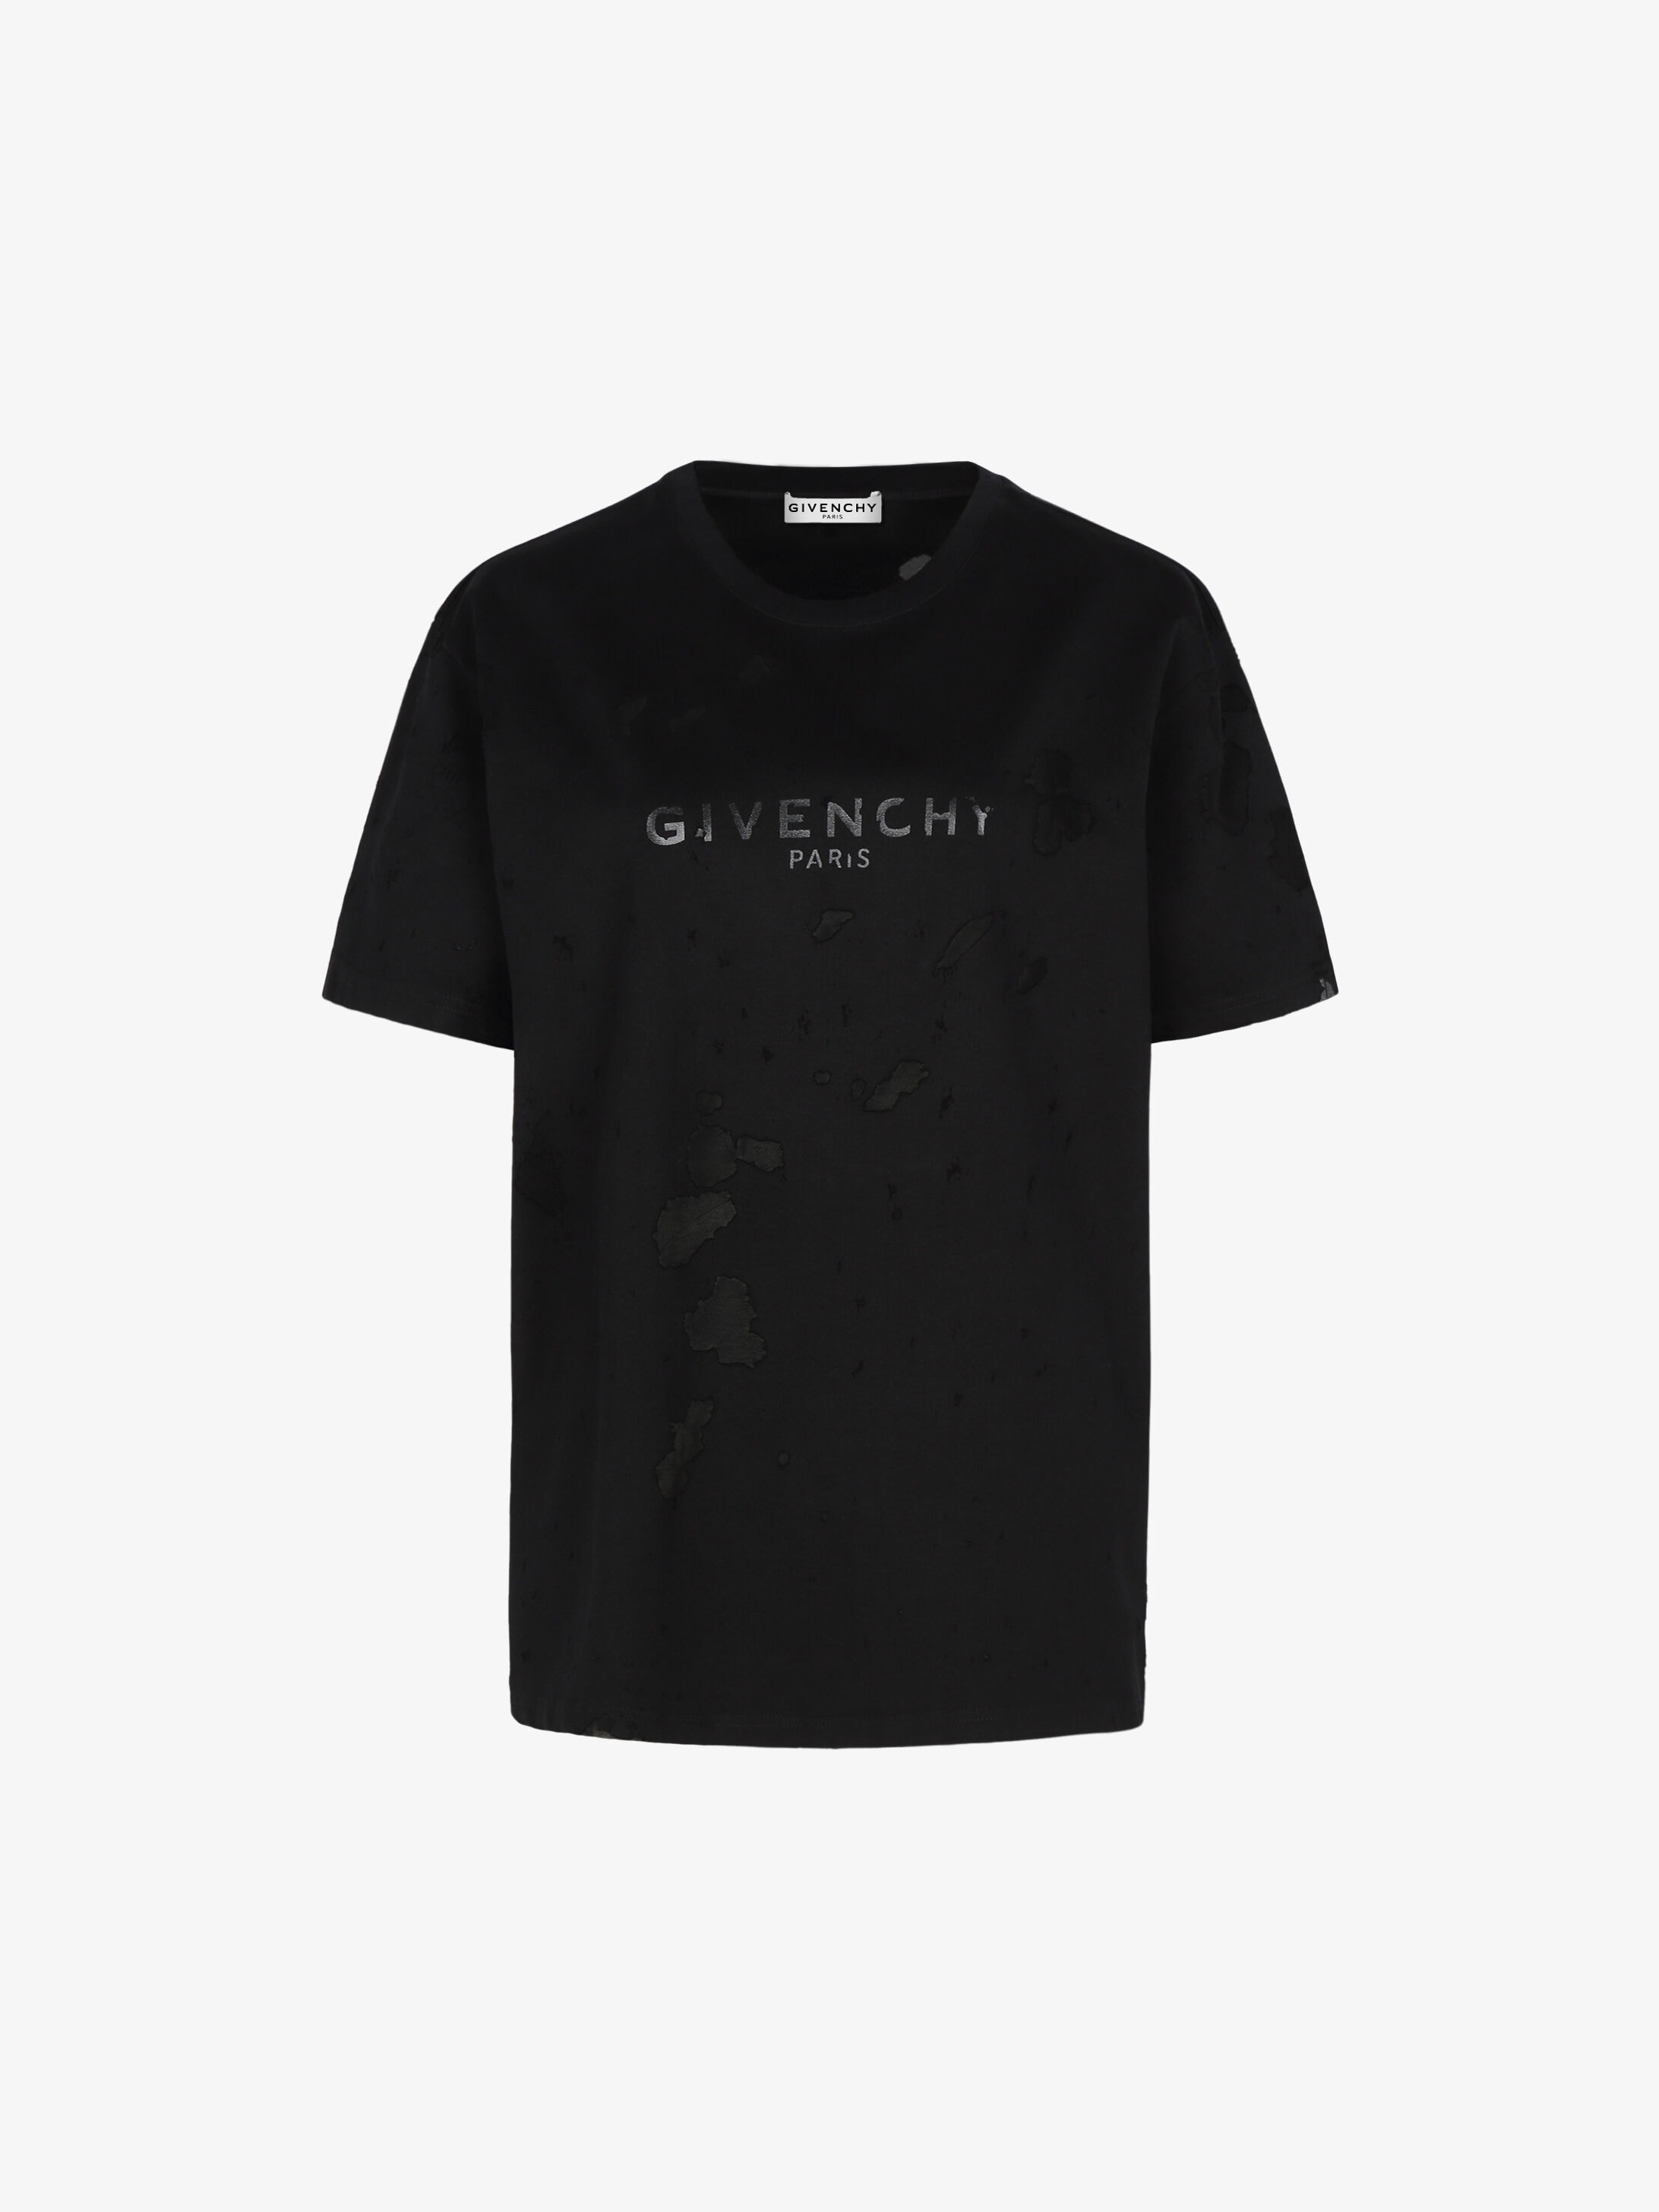 givenchy t shirt ripped